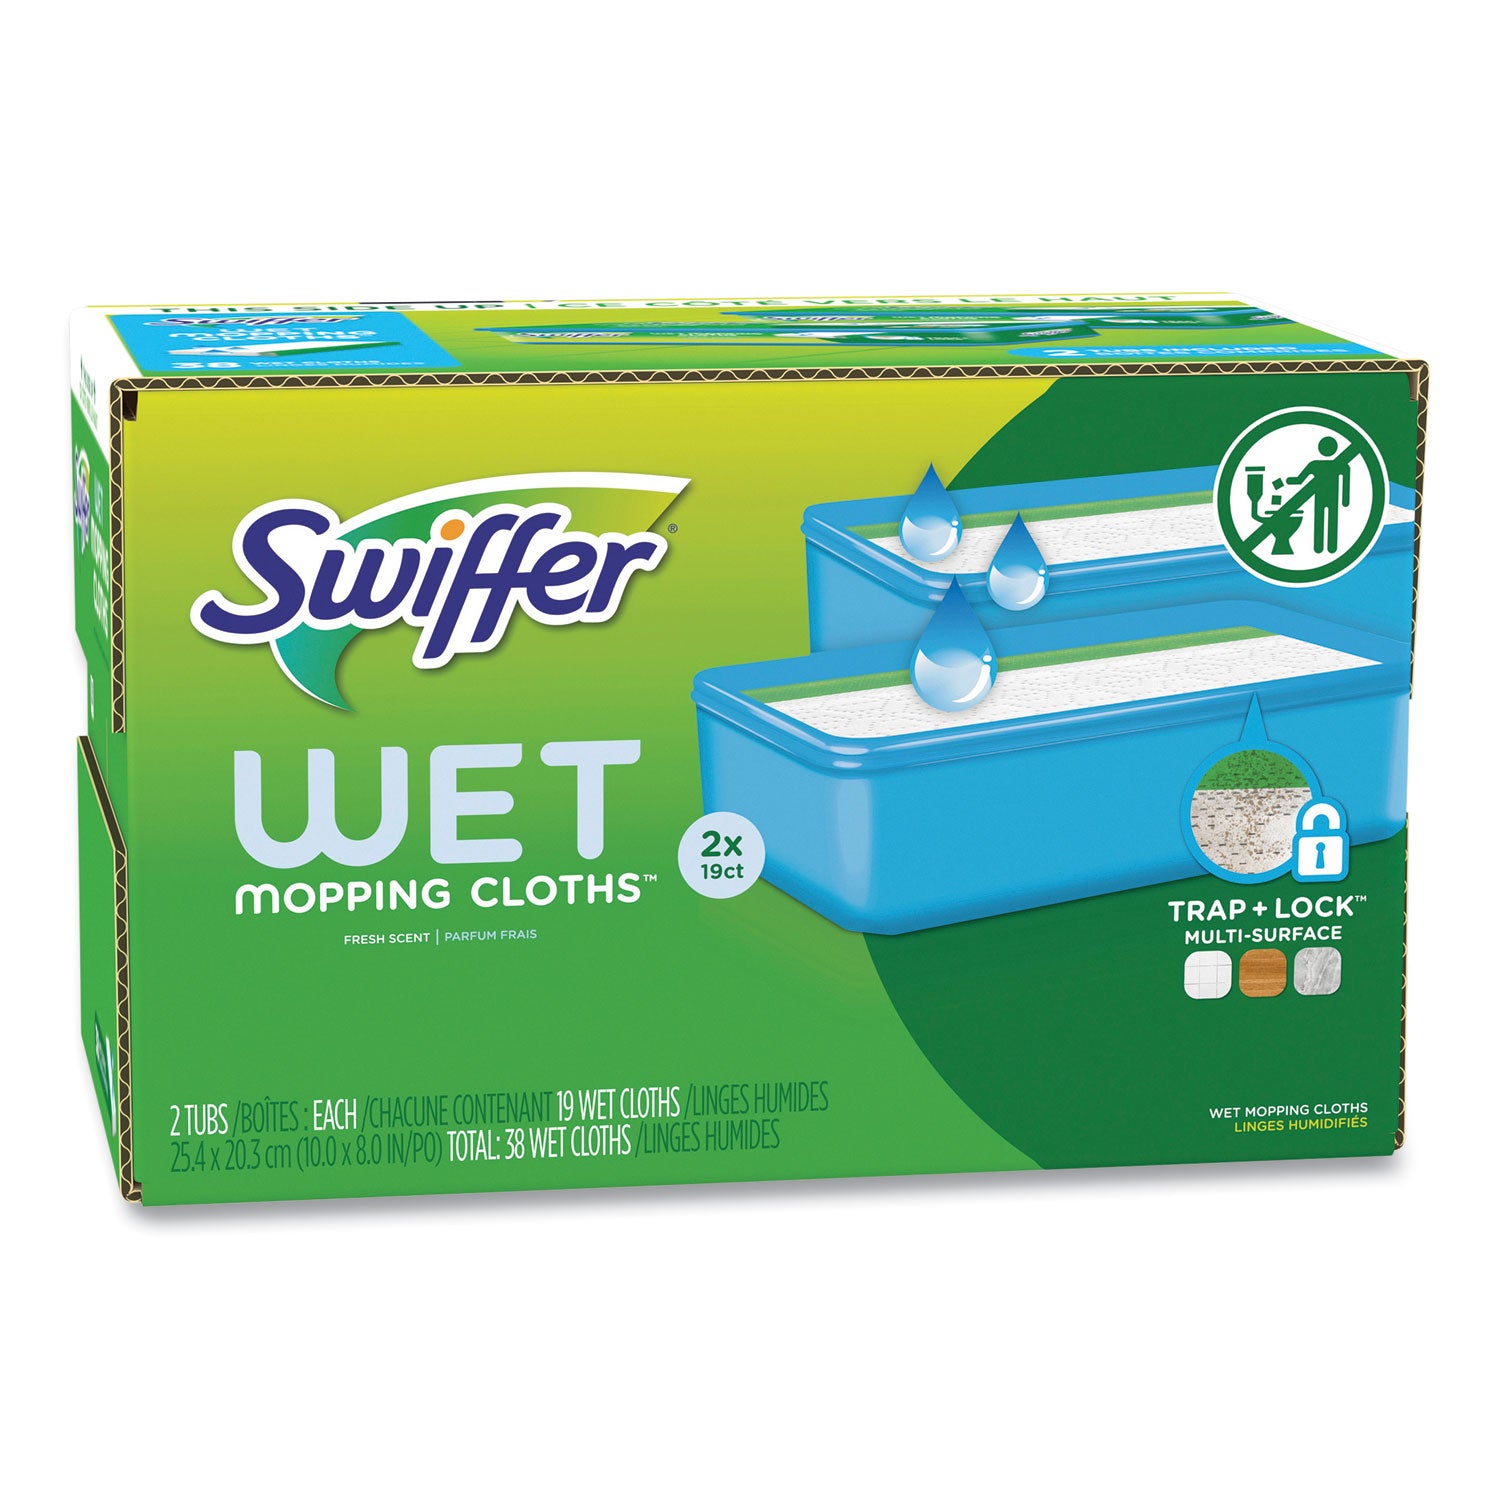 sweeper-trap-+-lock-wet-mop-cloth-8-x-10-white-open-window-scent-38-pack_pgc00742 - 2